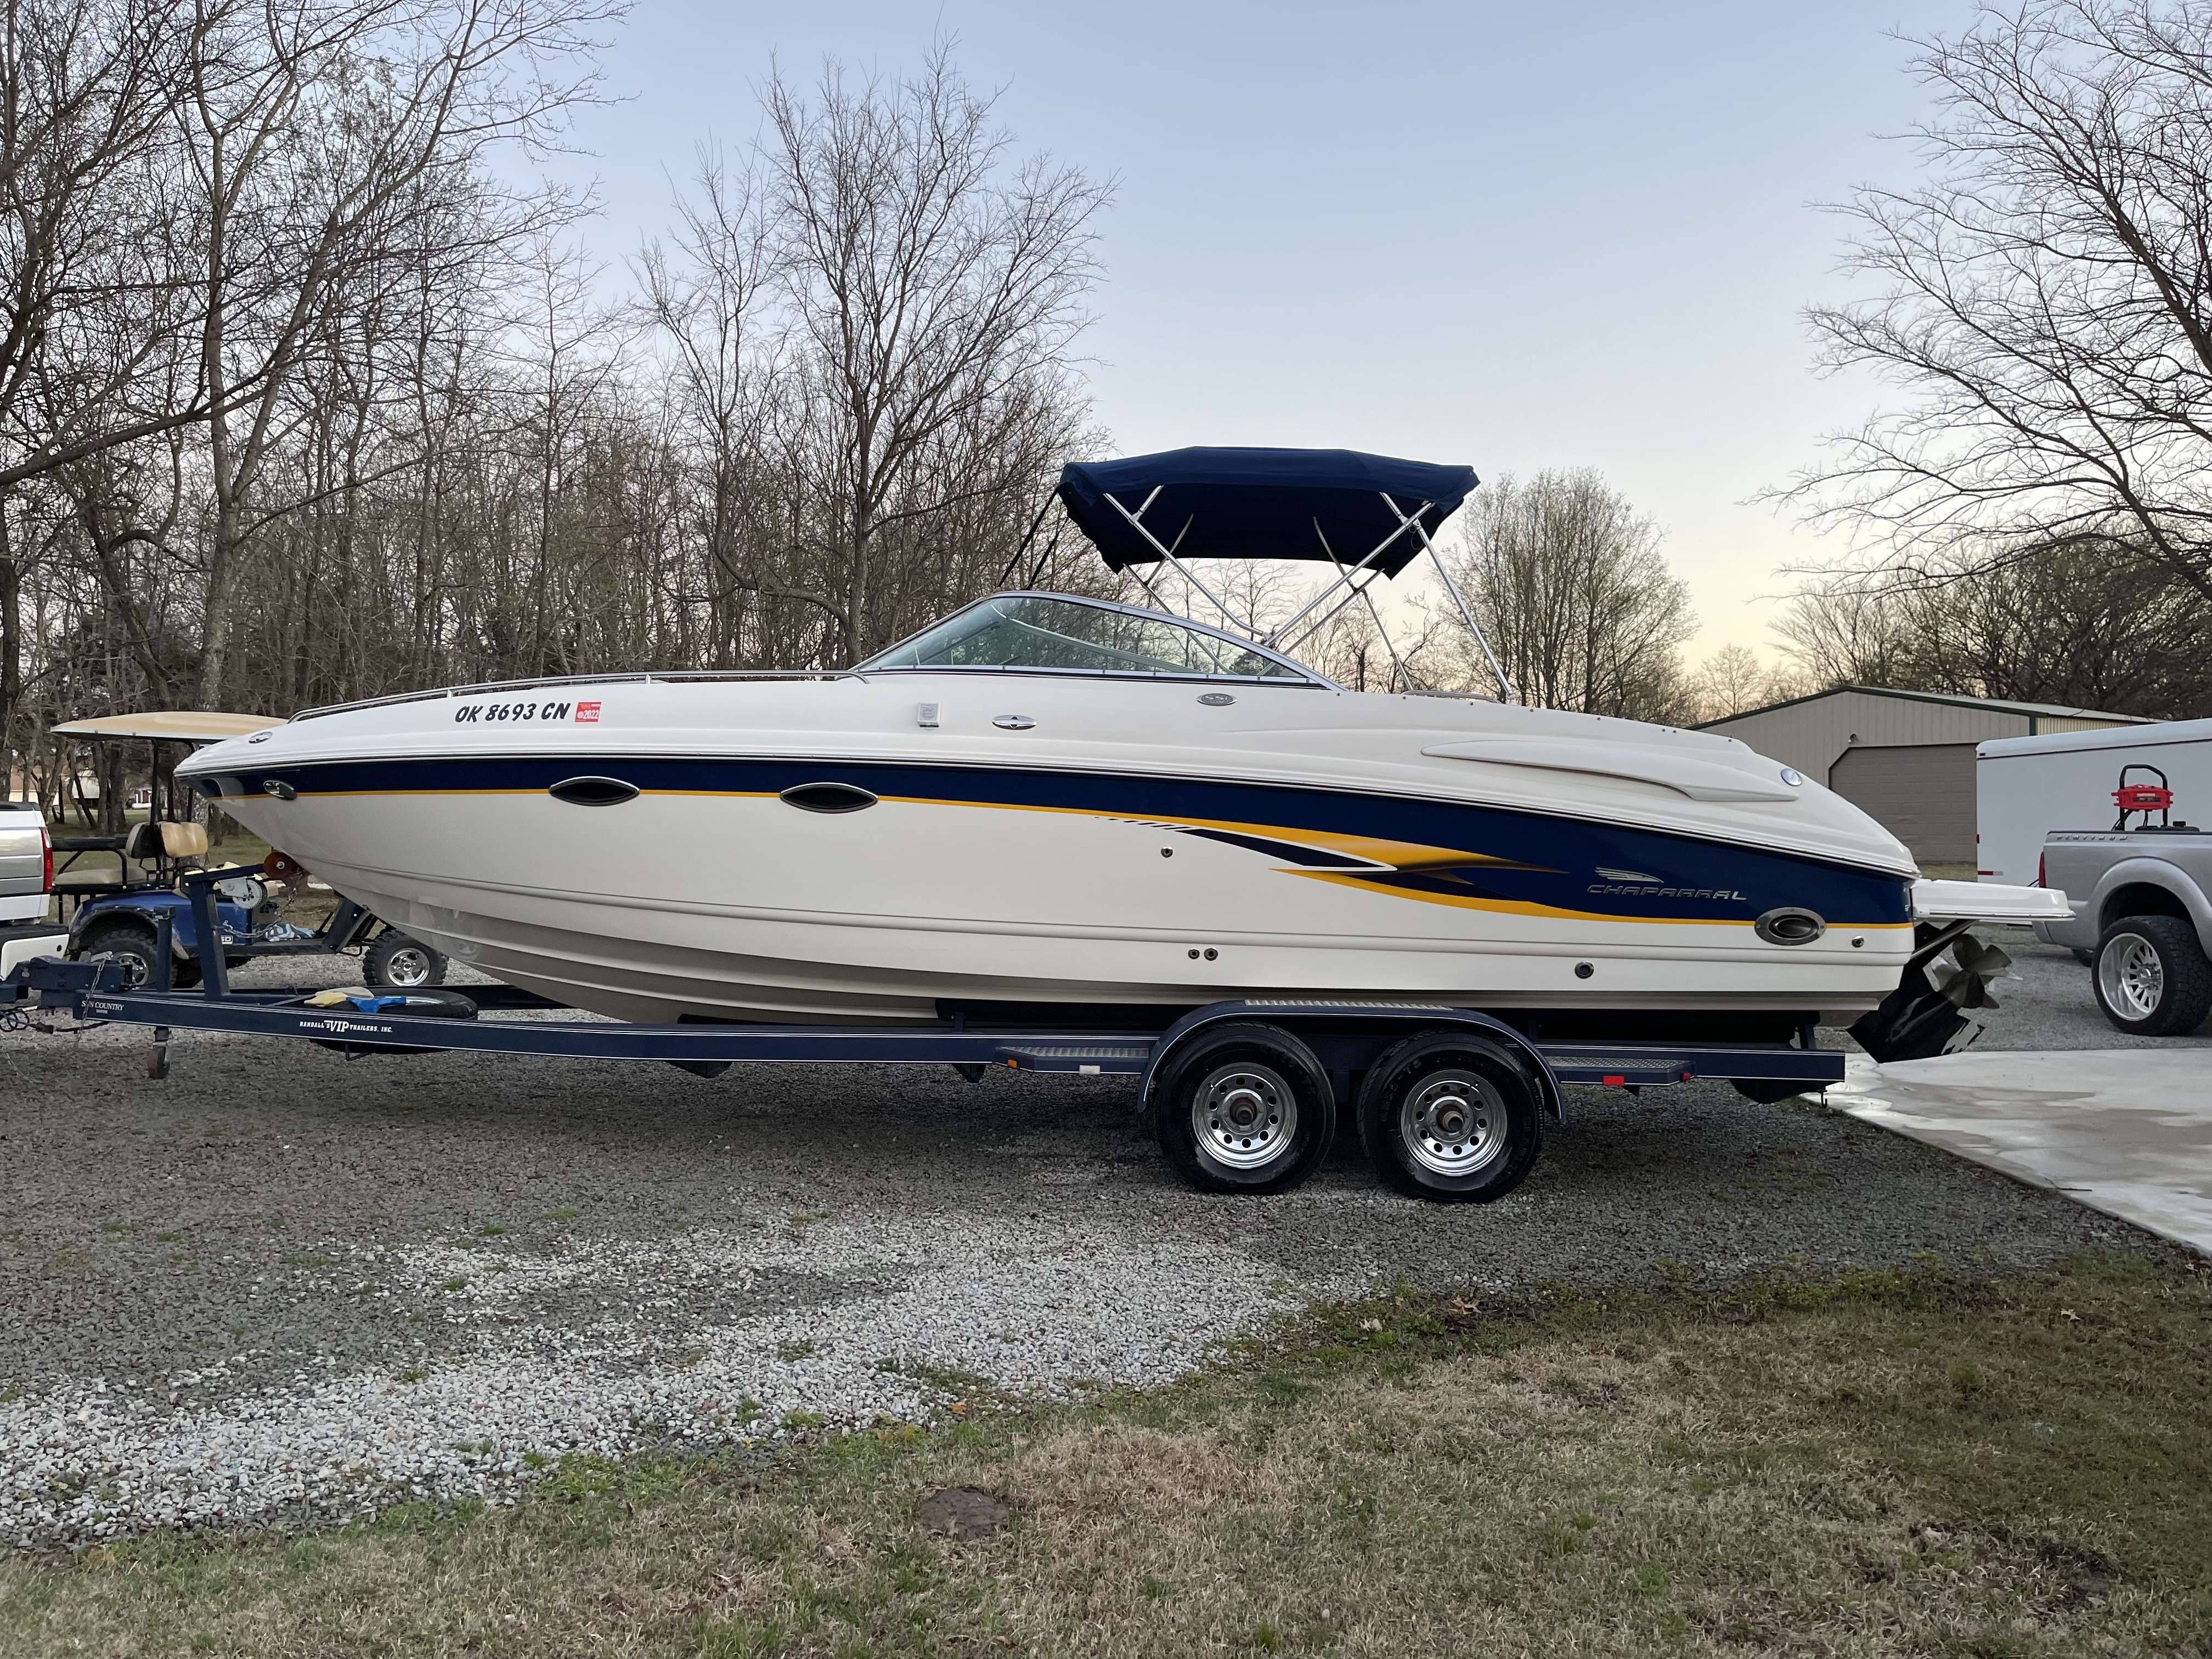 2003 Chaparral 265ssi Power boat for sale in Checotah, OK - image 6 